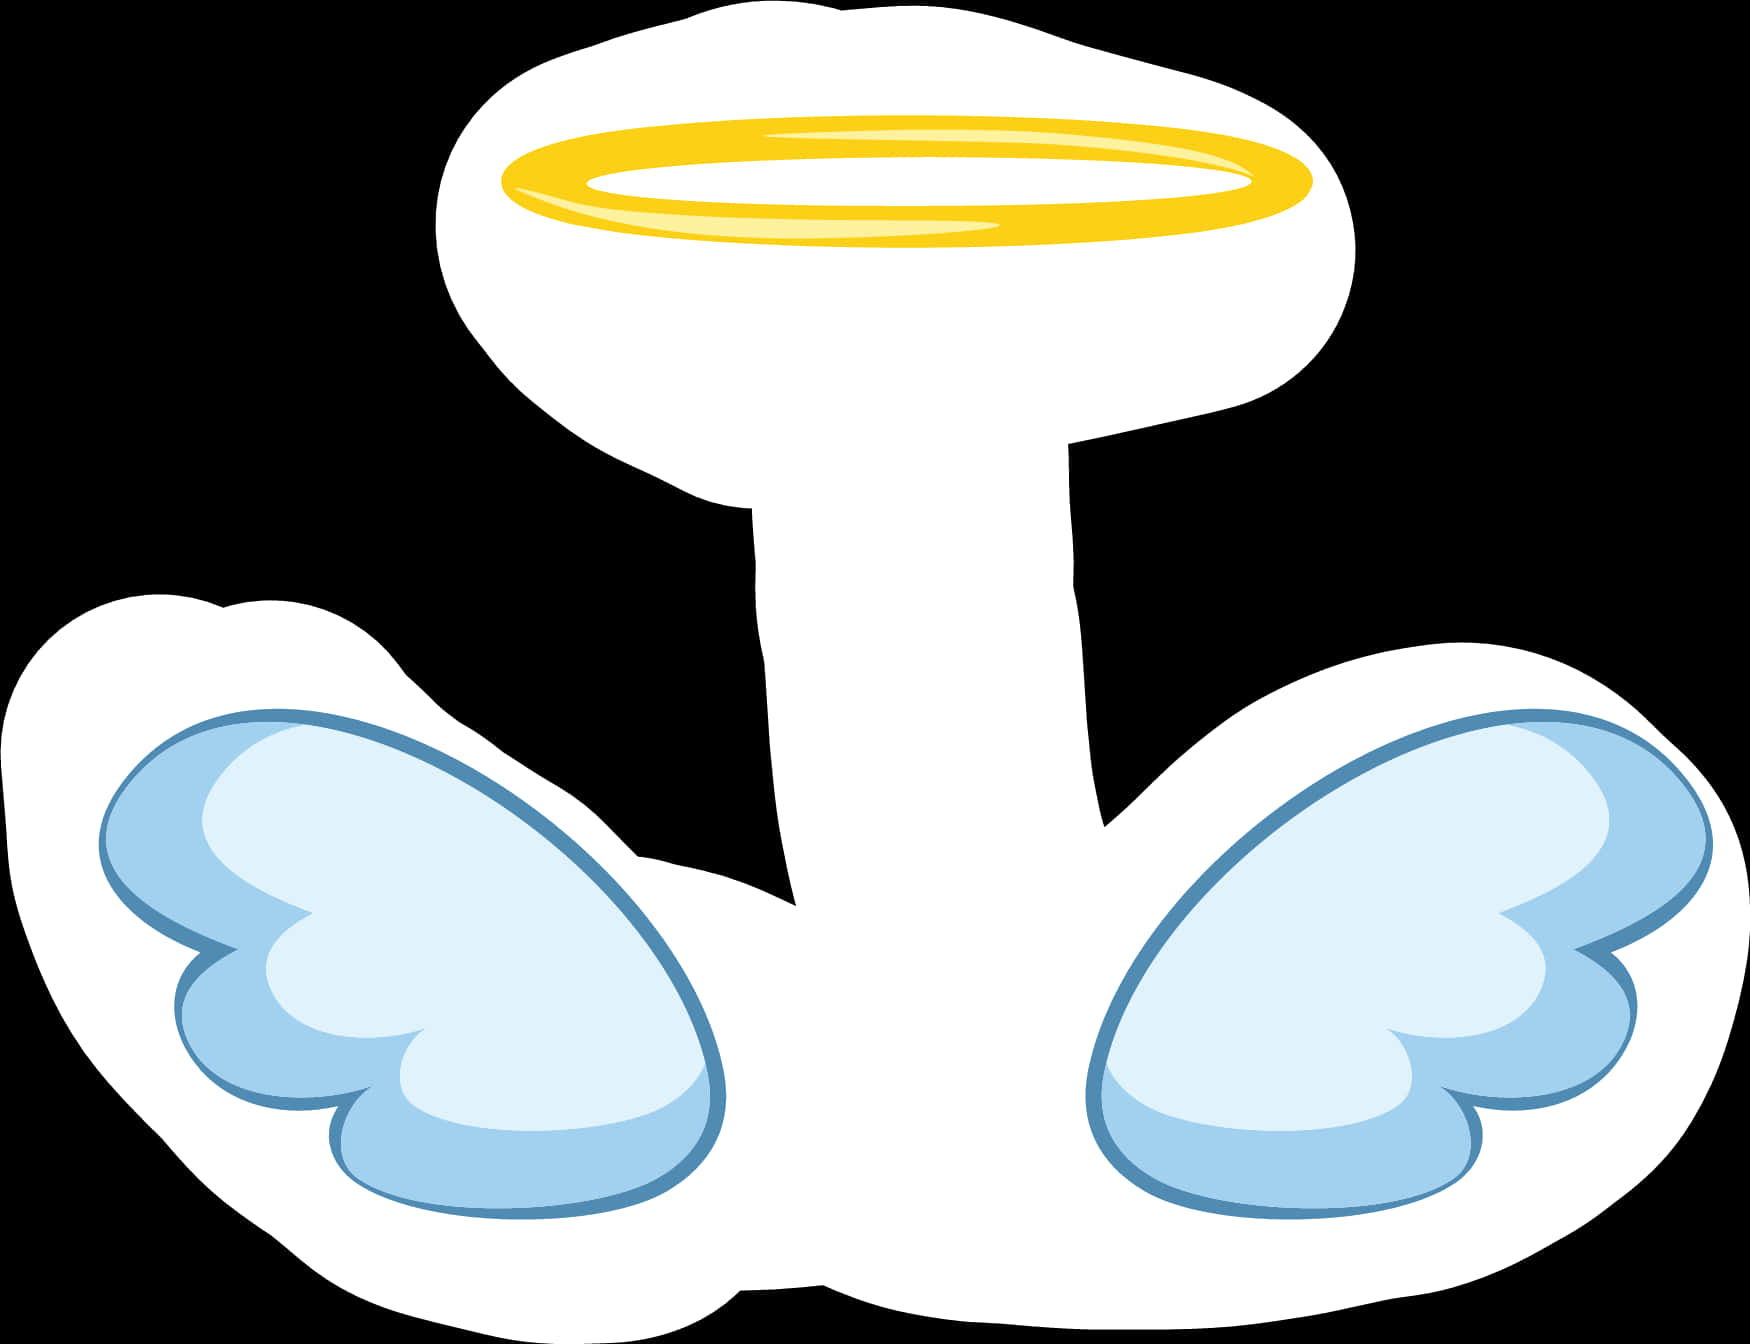 A Sticker Of A Angel With Wings And A Halo